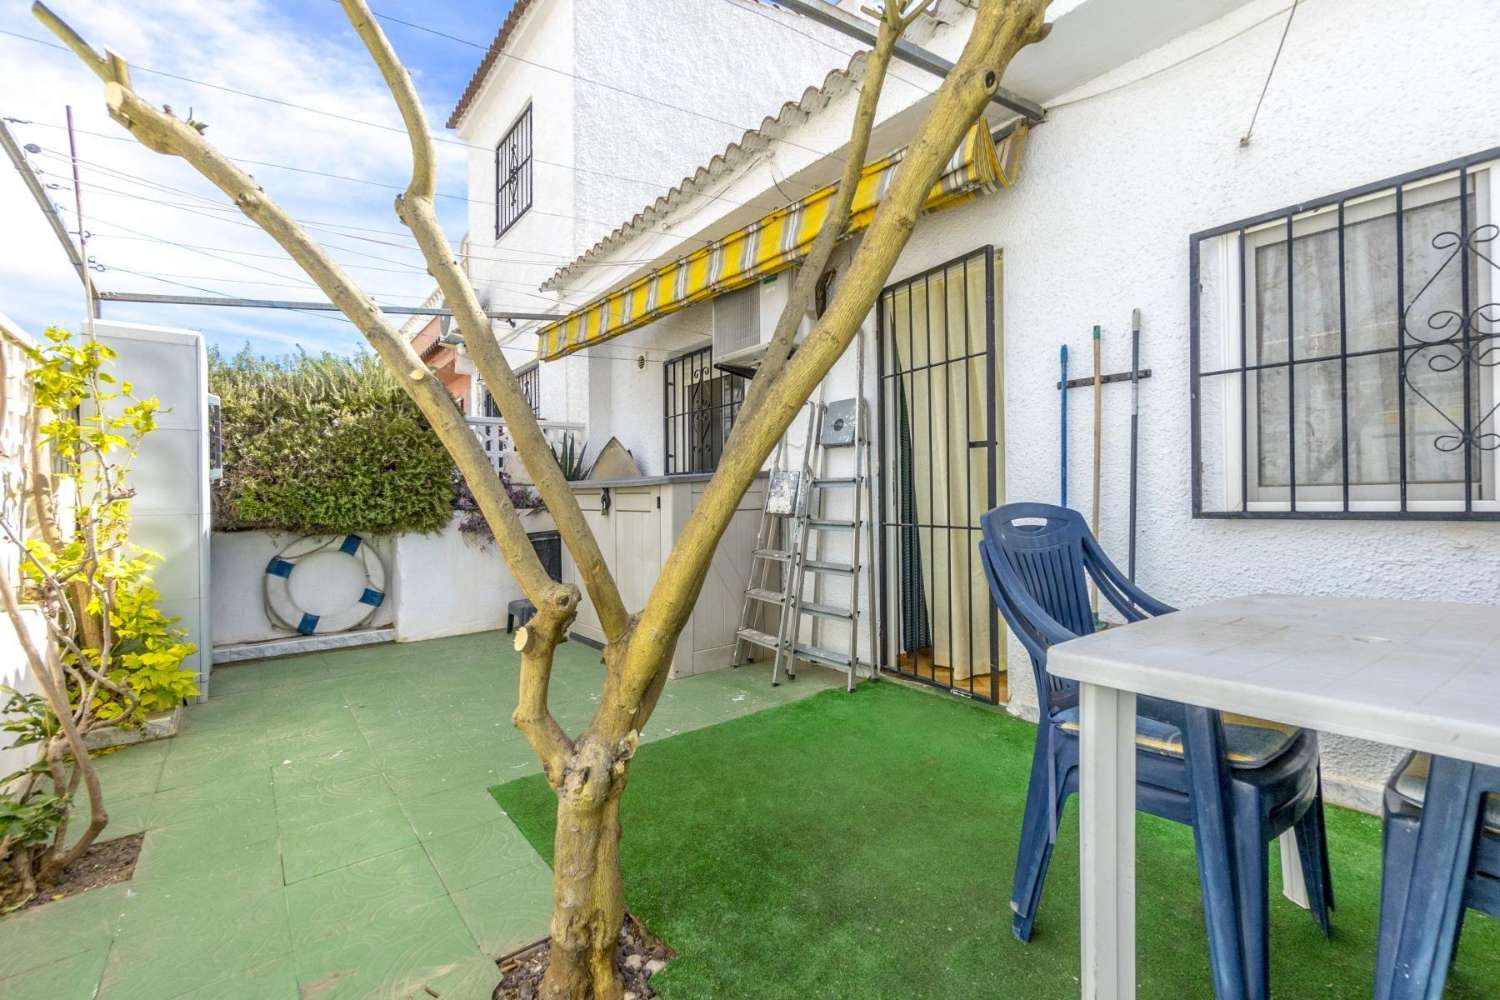 TORREVIEJA El Limonar, Charming 2 bedroom semi-detached house, renovated, with shared swimming pool